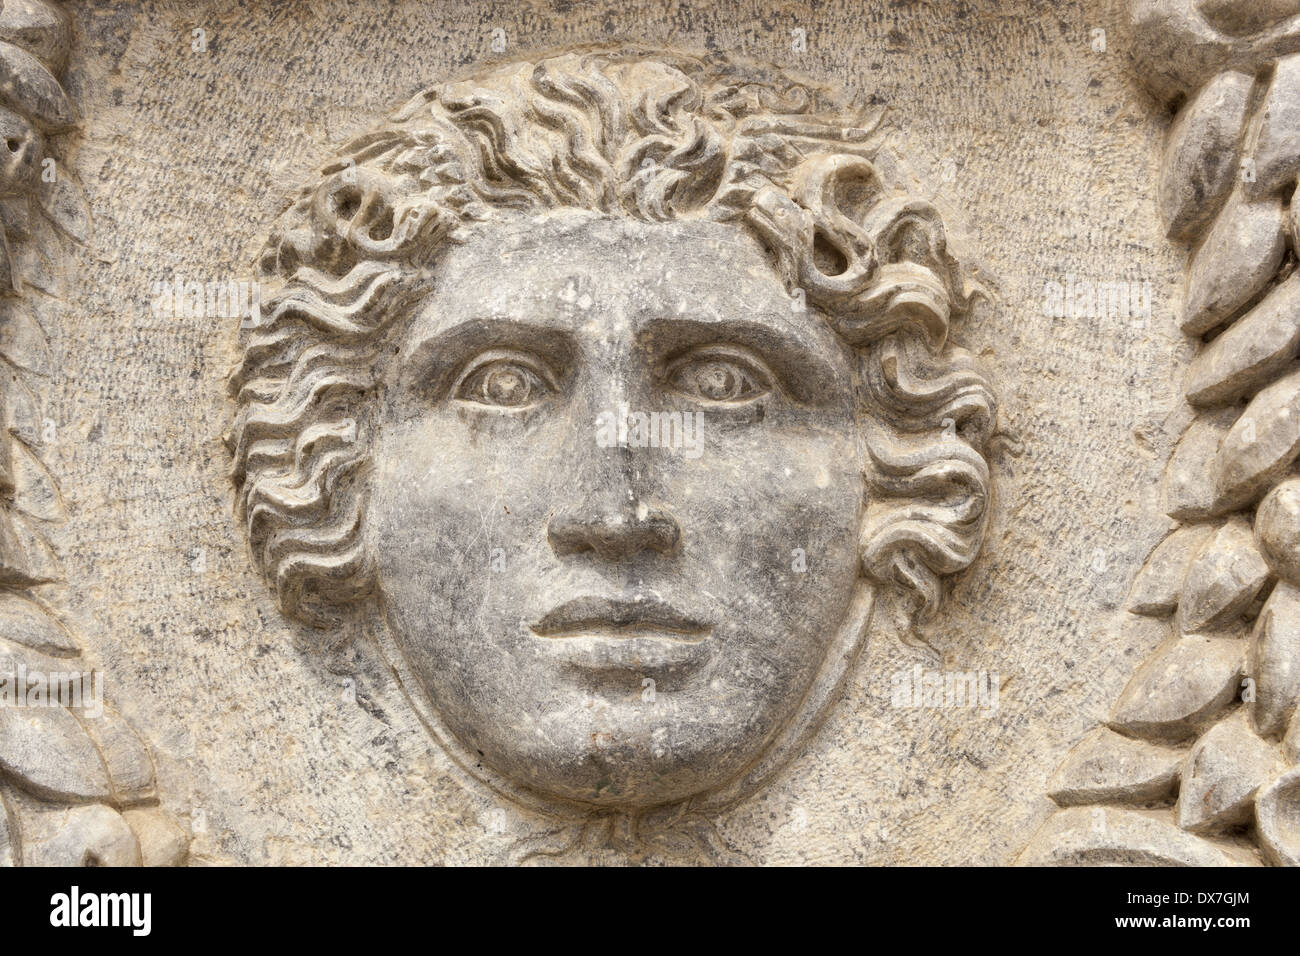 Carved stone face detail on a sarcophagus at The Catacombs of Kom El Shuqafa, Alexandria, Egypt Stock Photo